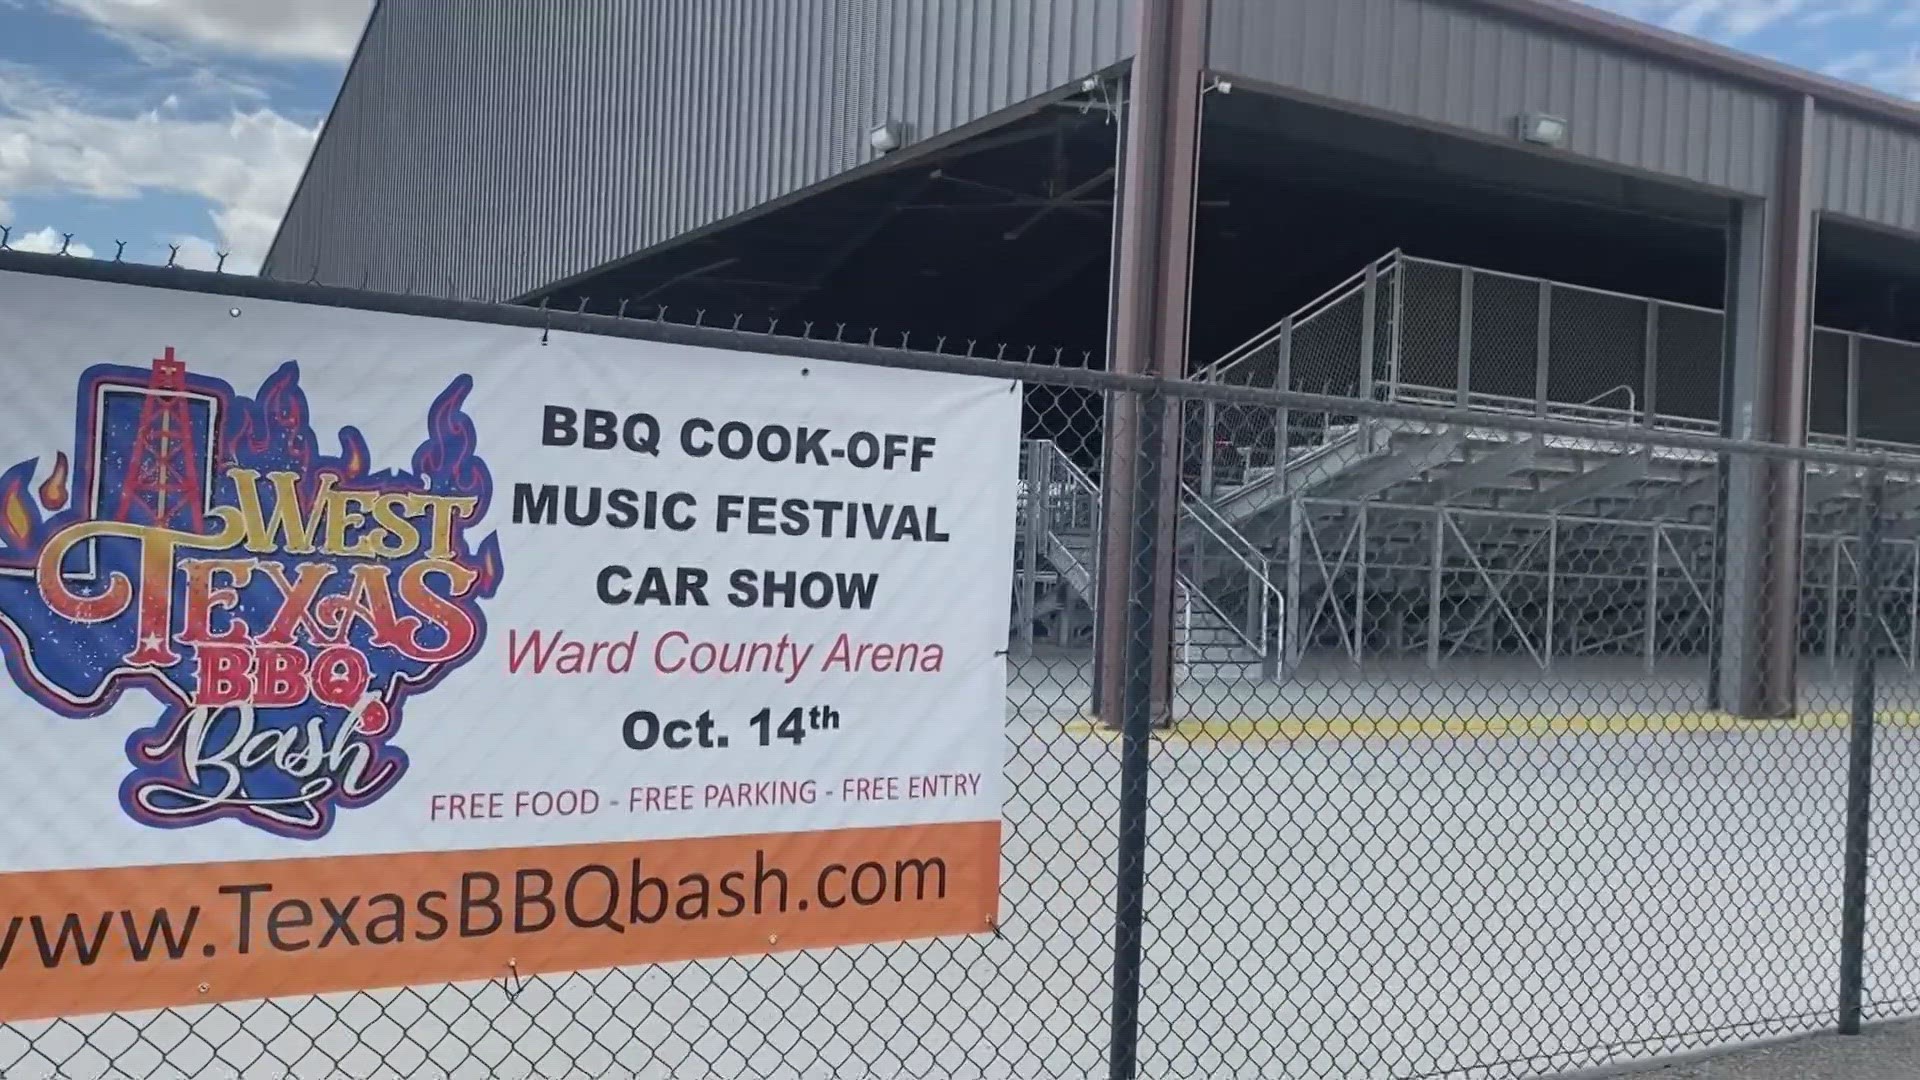 The Barbecue Bash started during the COVID-19 pandemic as a way for the oil and gas industry to uplift families within the communities.